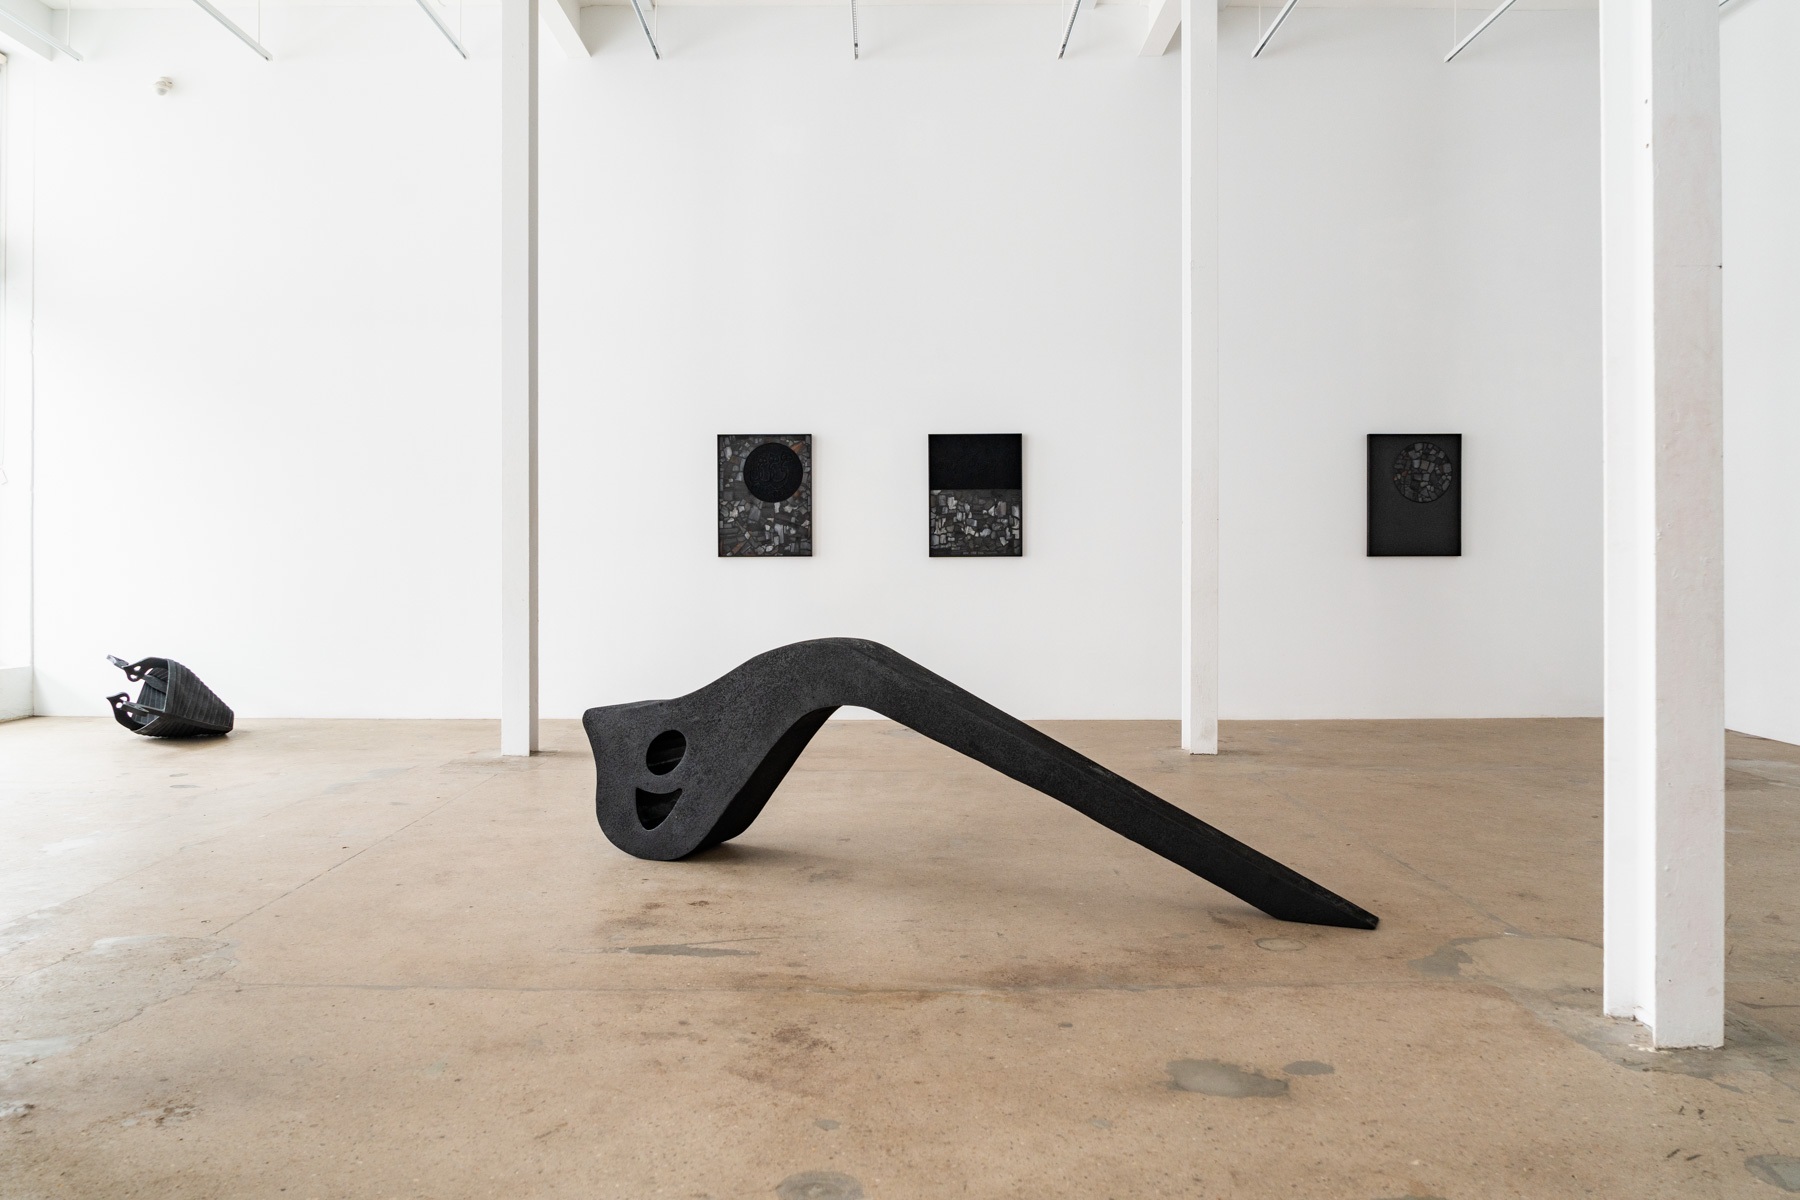 In a gallery, two large dark sculptural forms: one like a boat and the other like a lettered symbol lie on the floor. Three small dark rectagular works hang on the far wall.